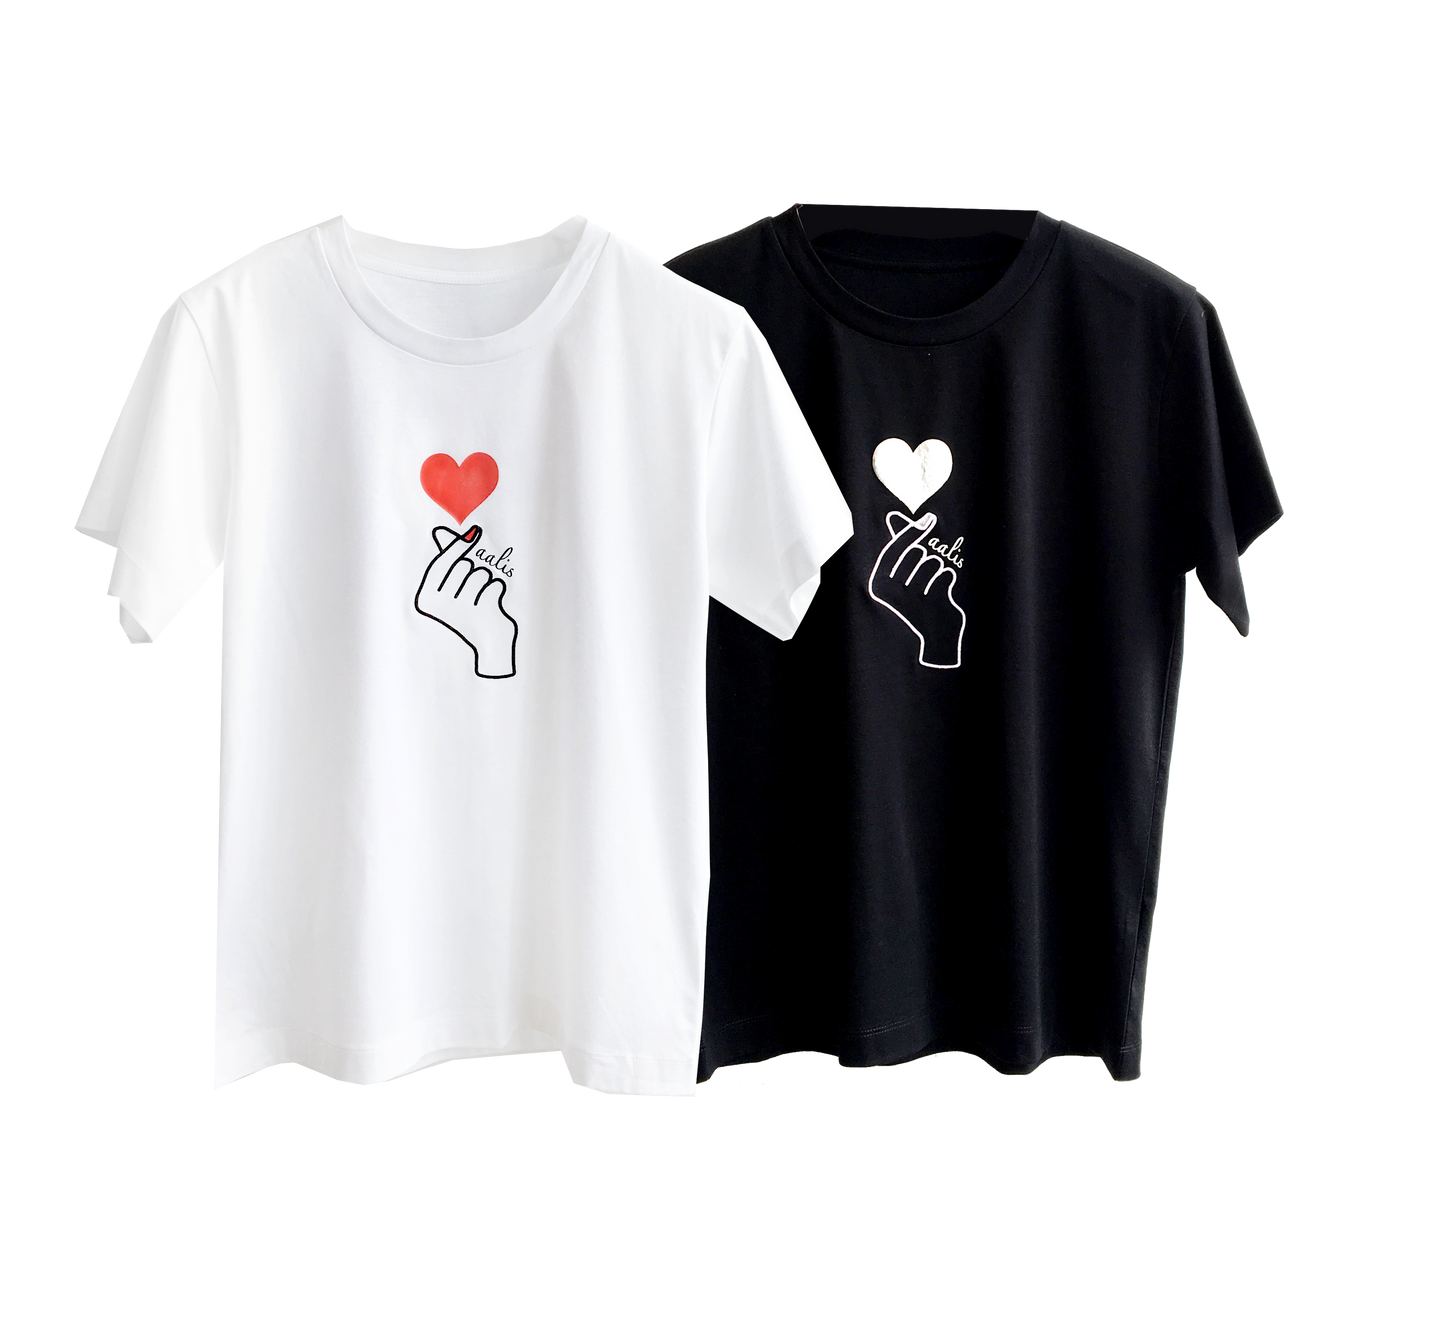 AALIS LAUNCHES “AALIS FINGER HEART” CHARITY TEES